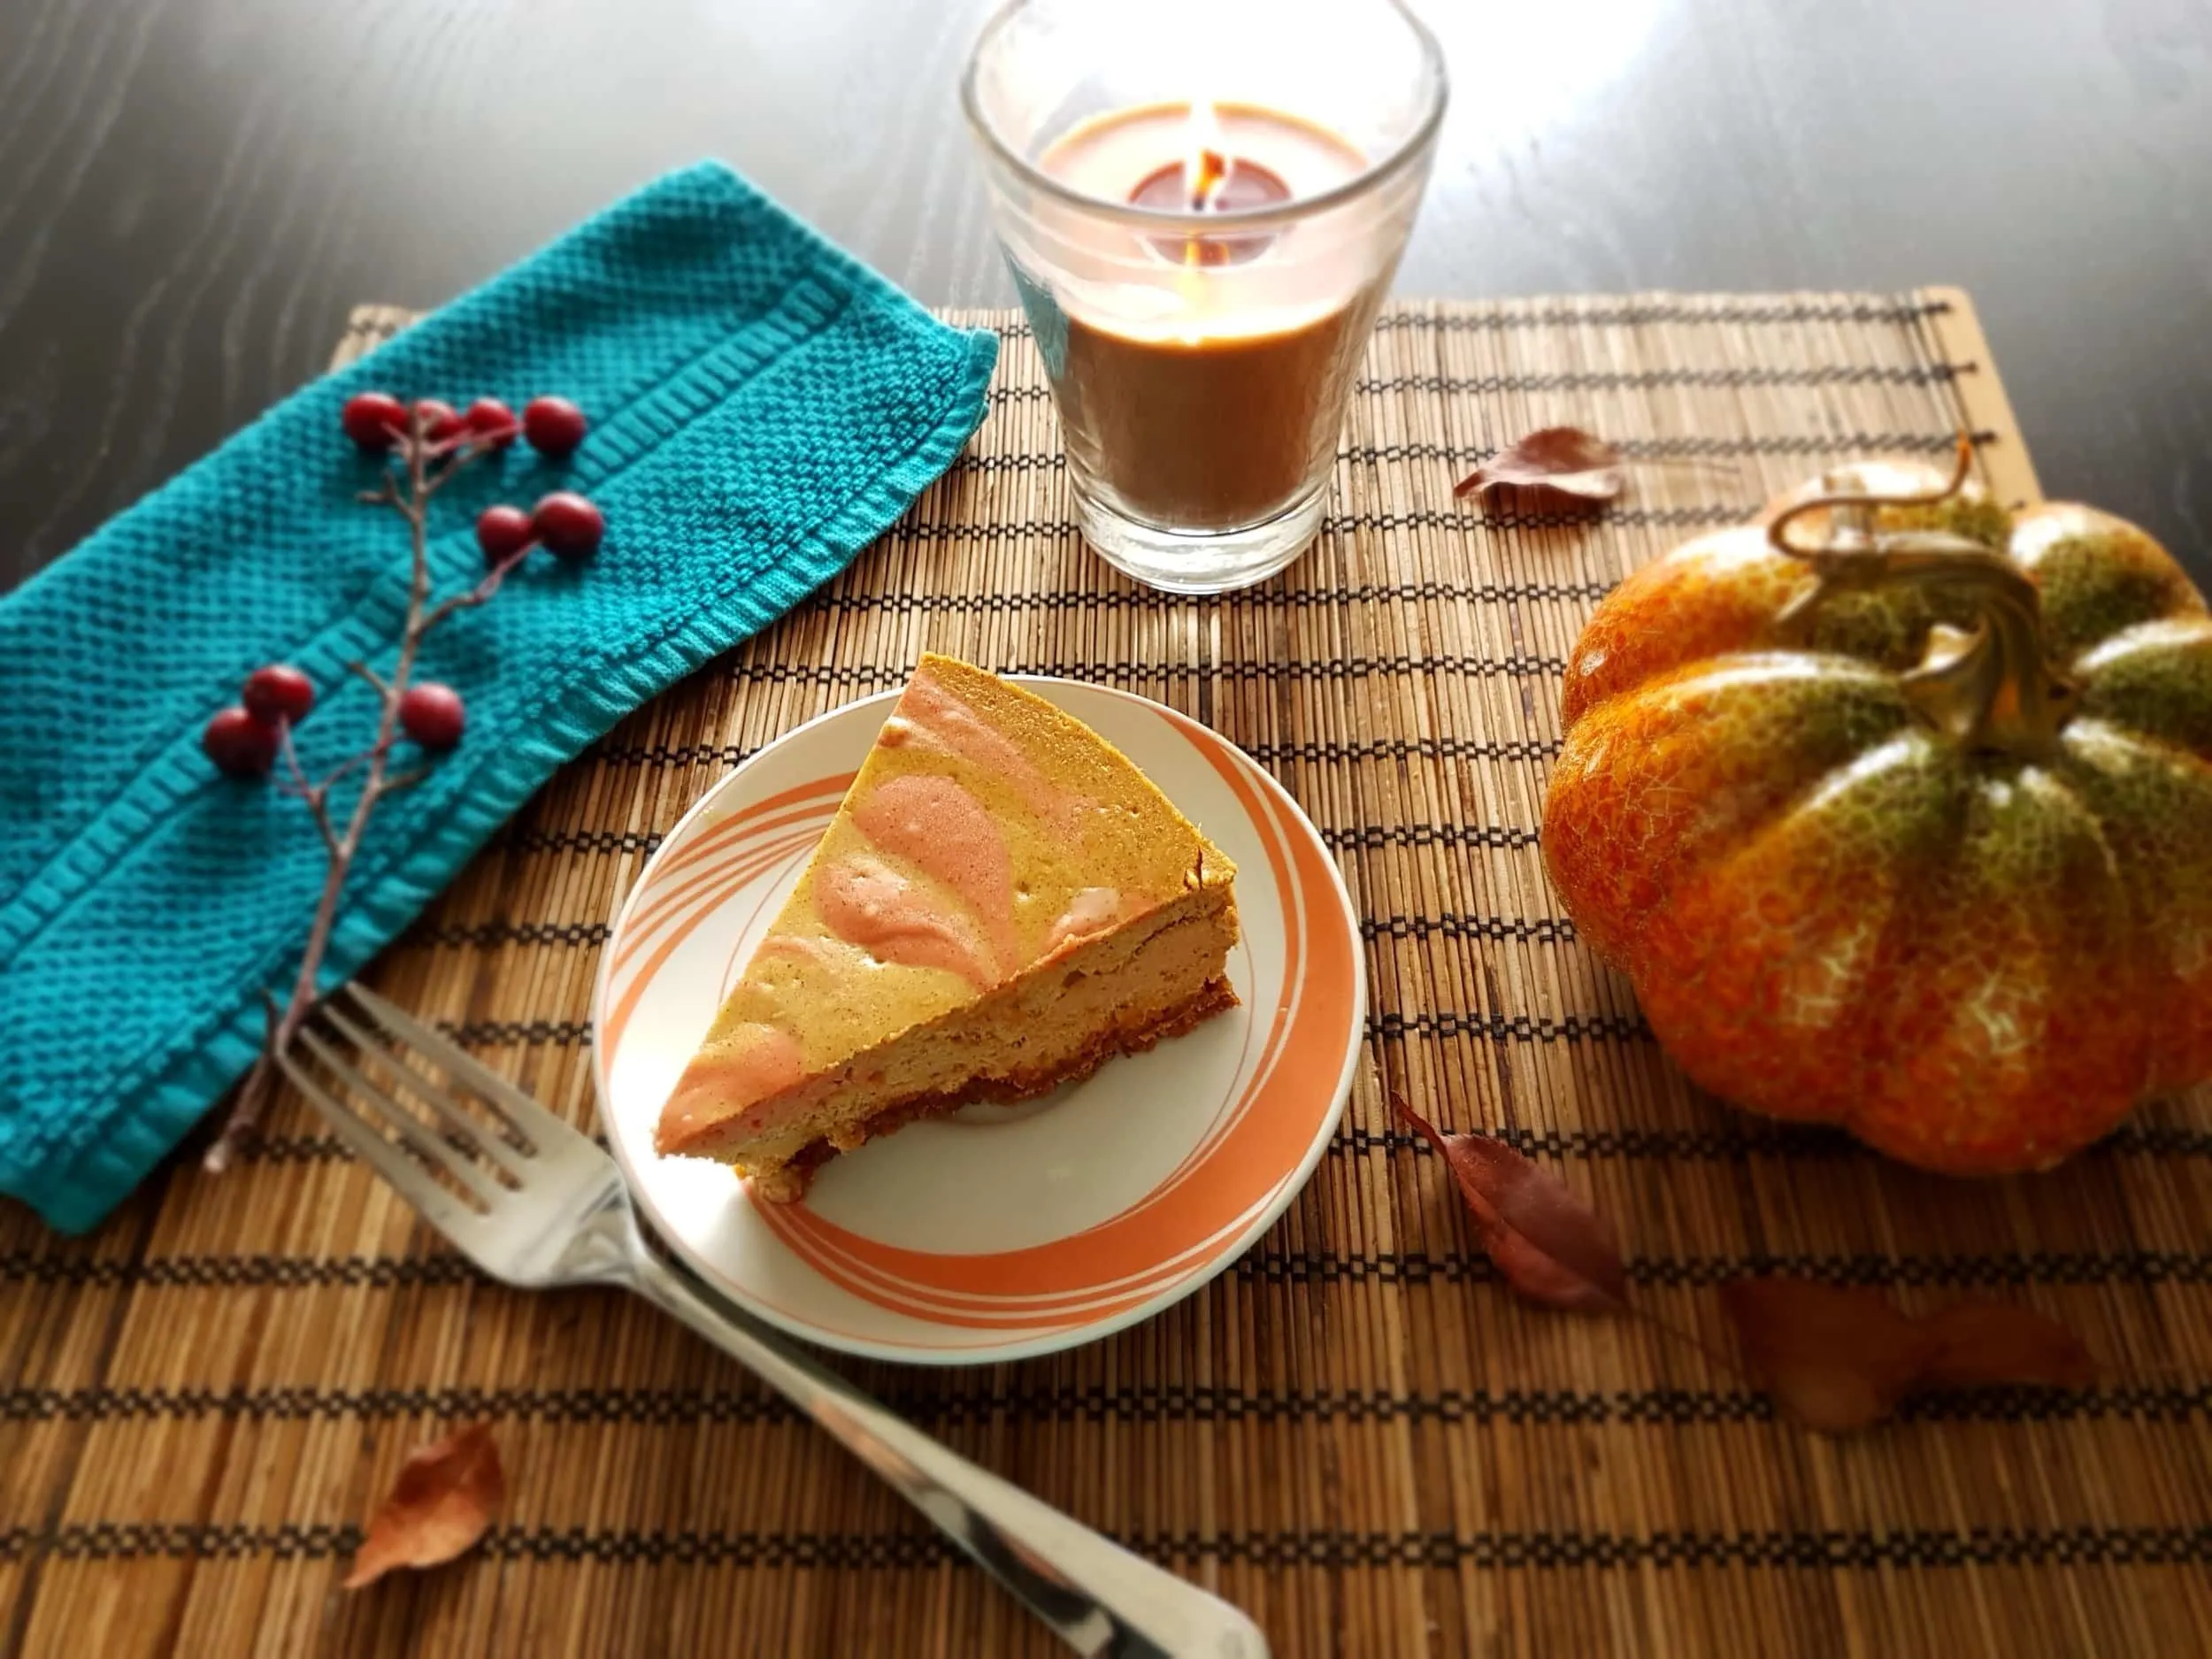 A slice of Baked Pumpkin Cheesecake surrounded by autumn decor.